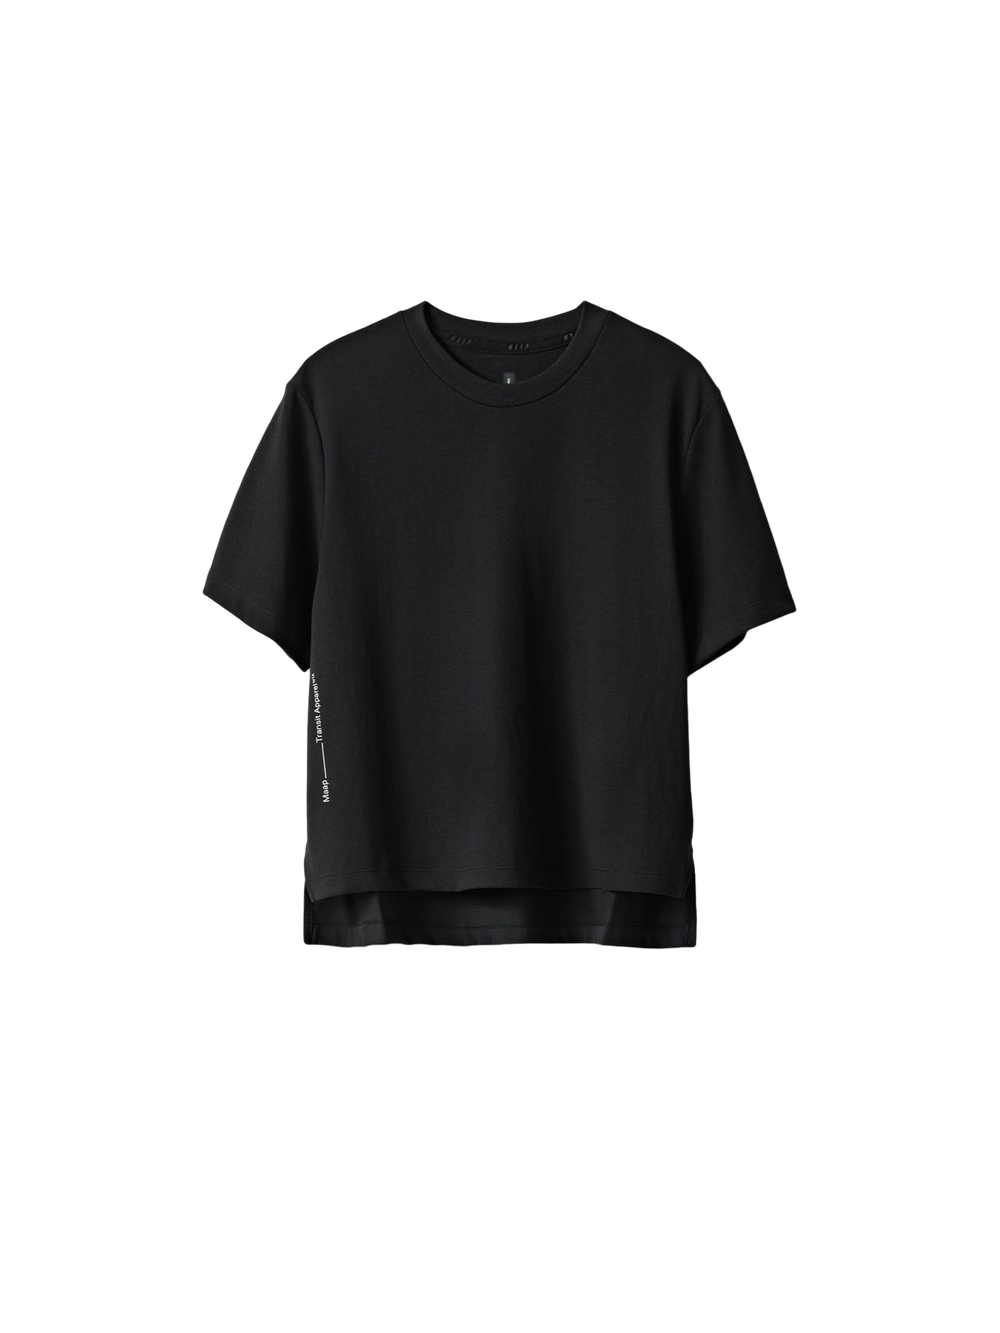 Product Image for Women's Transit Tee